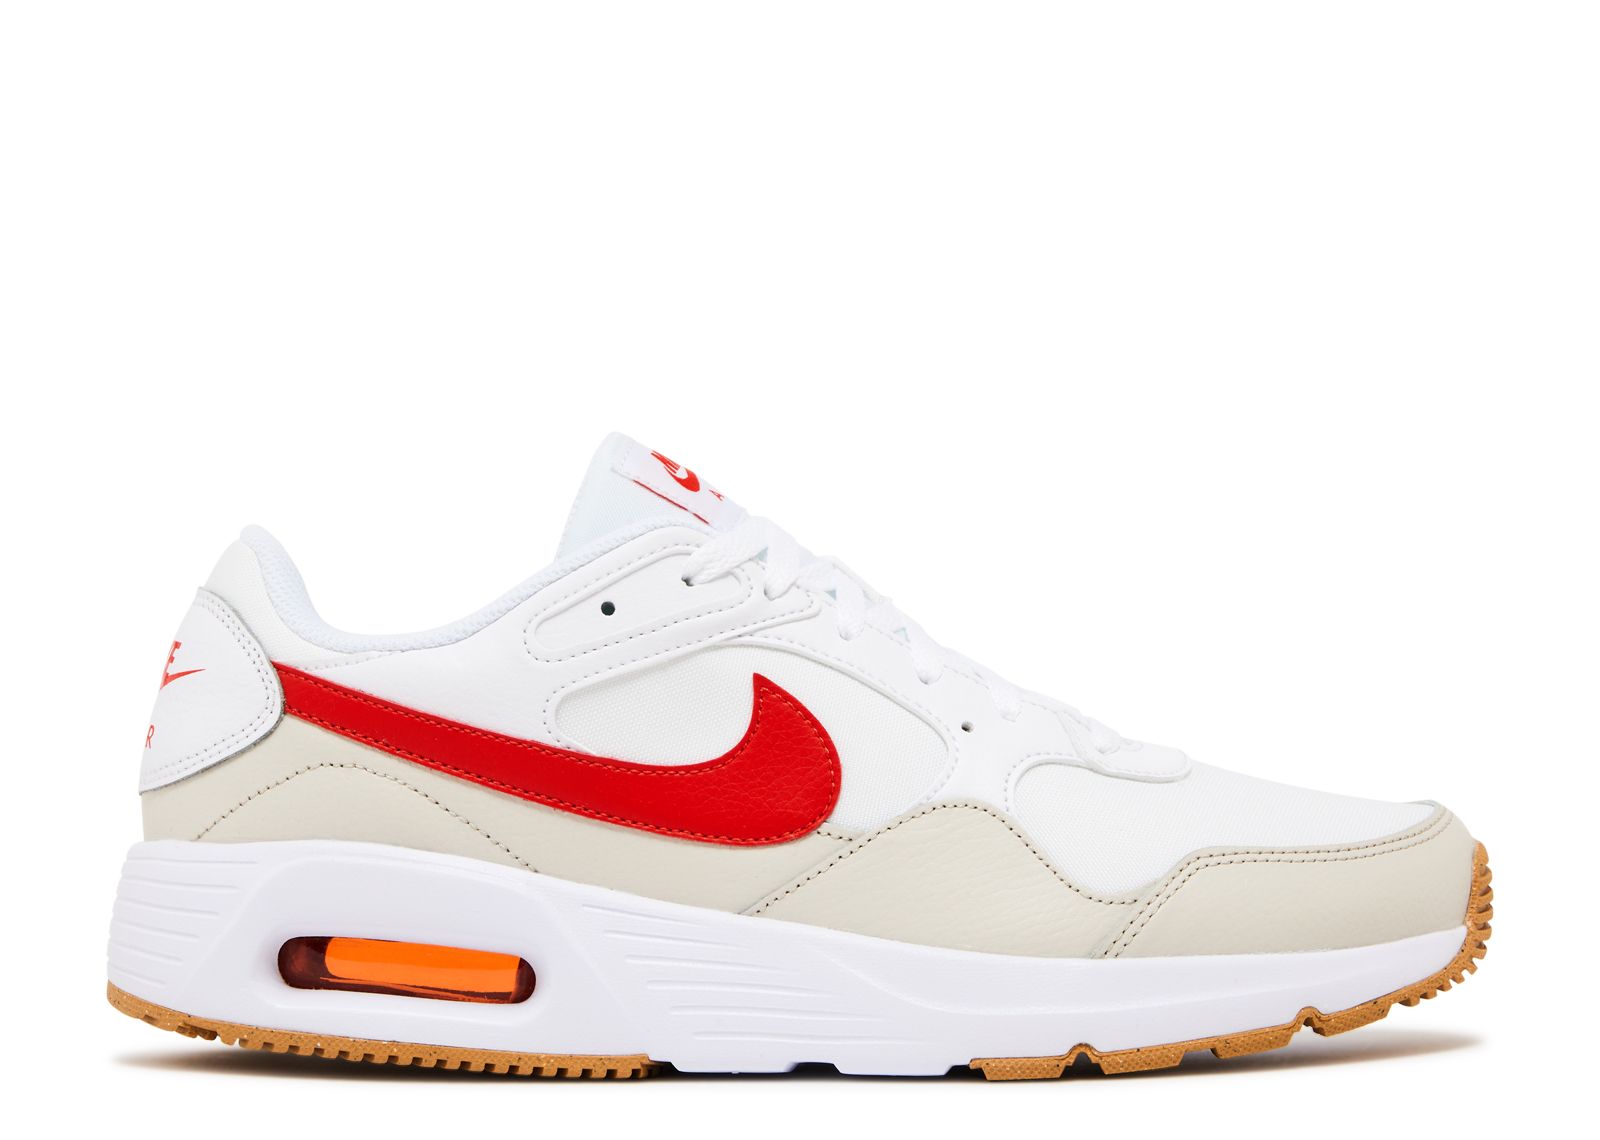 Air Max SC 'White Picante Red' - Nike - CW4555 112 - white/light orewood  brown/gum light brown/picante red | Flight Club